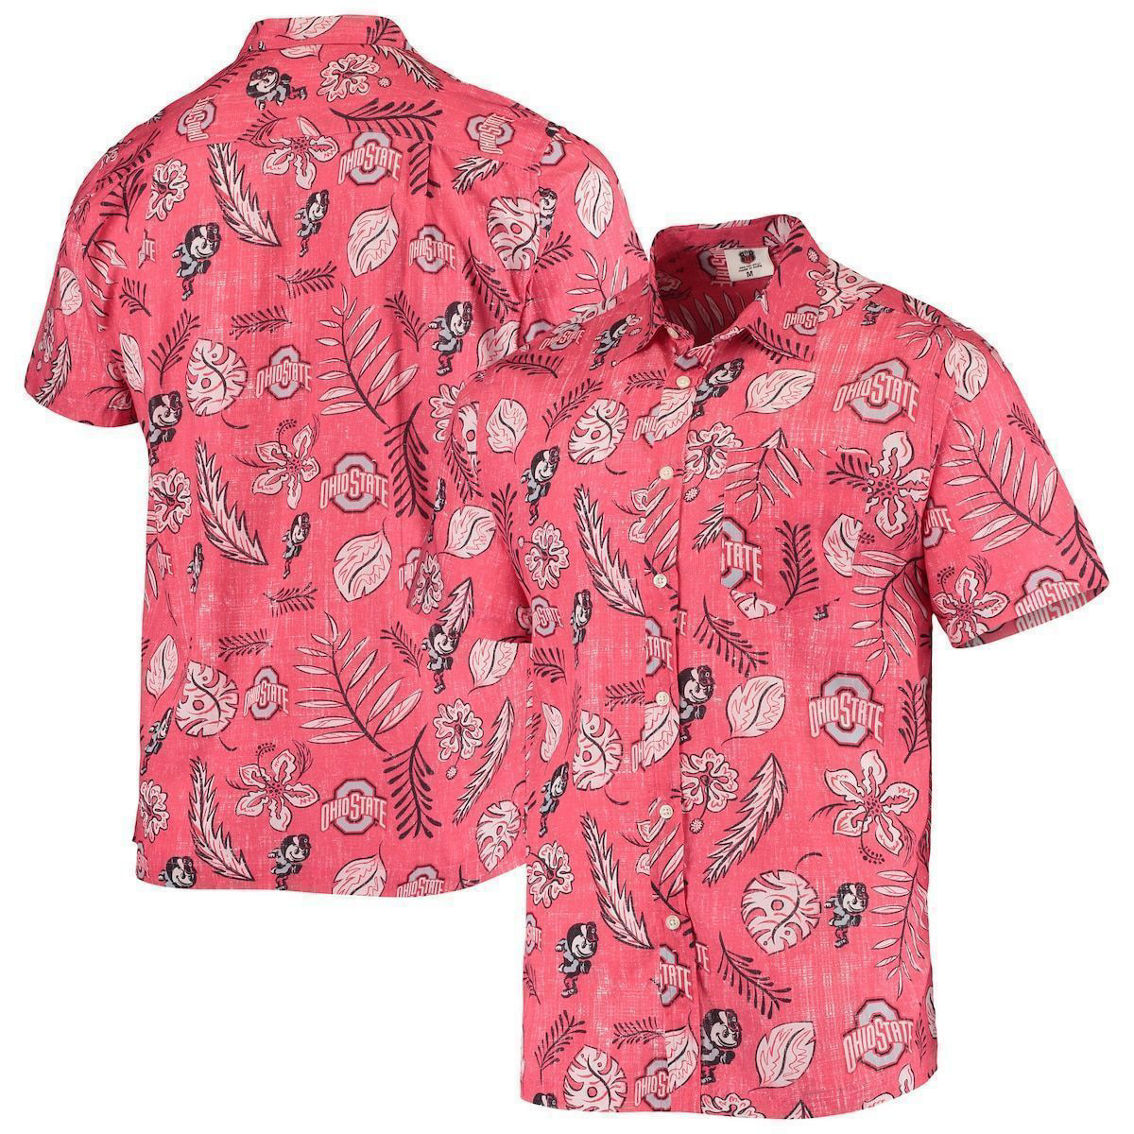 Wes & Willy Men's Scarlet Ohio State Buckeyes Vintage Floral Button-Up Shirt - Image 2 of 4